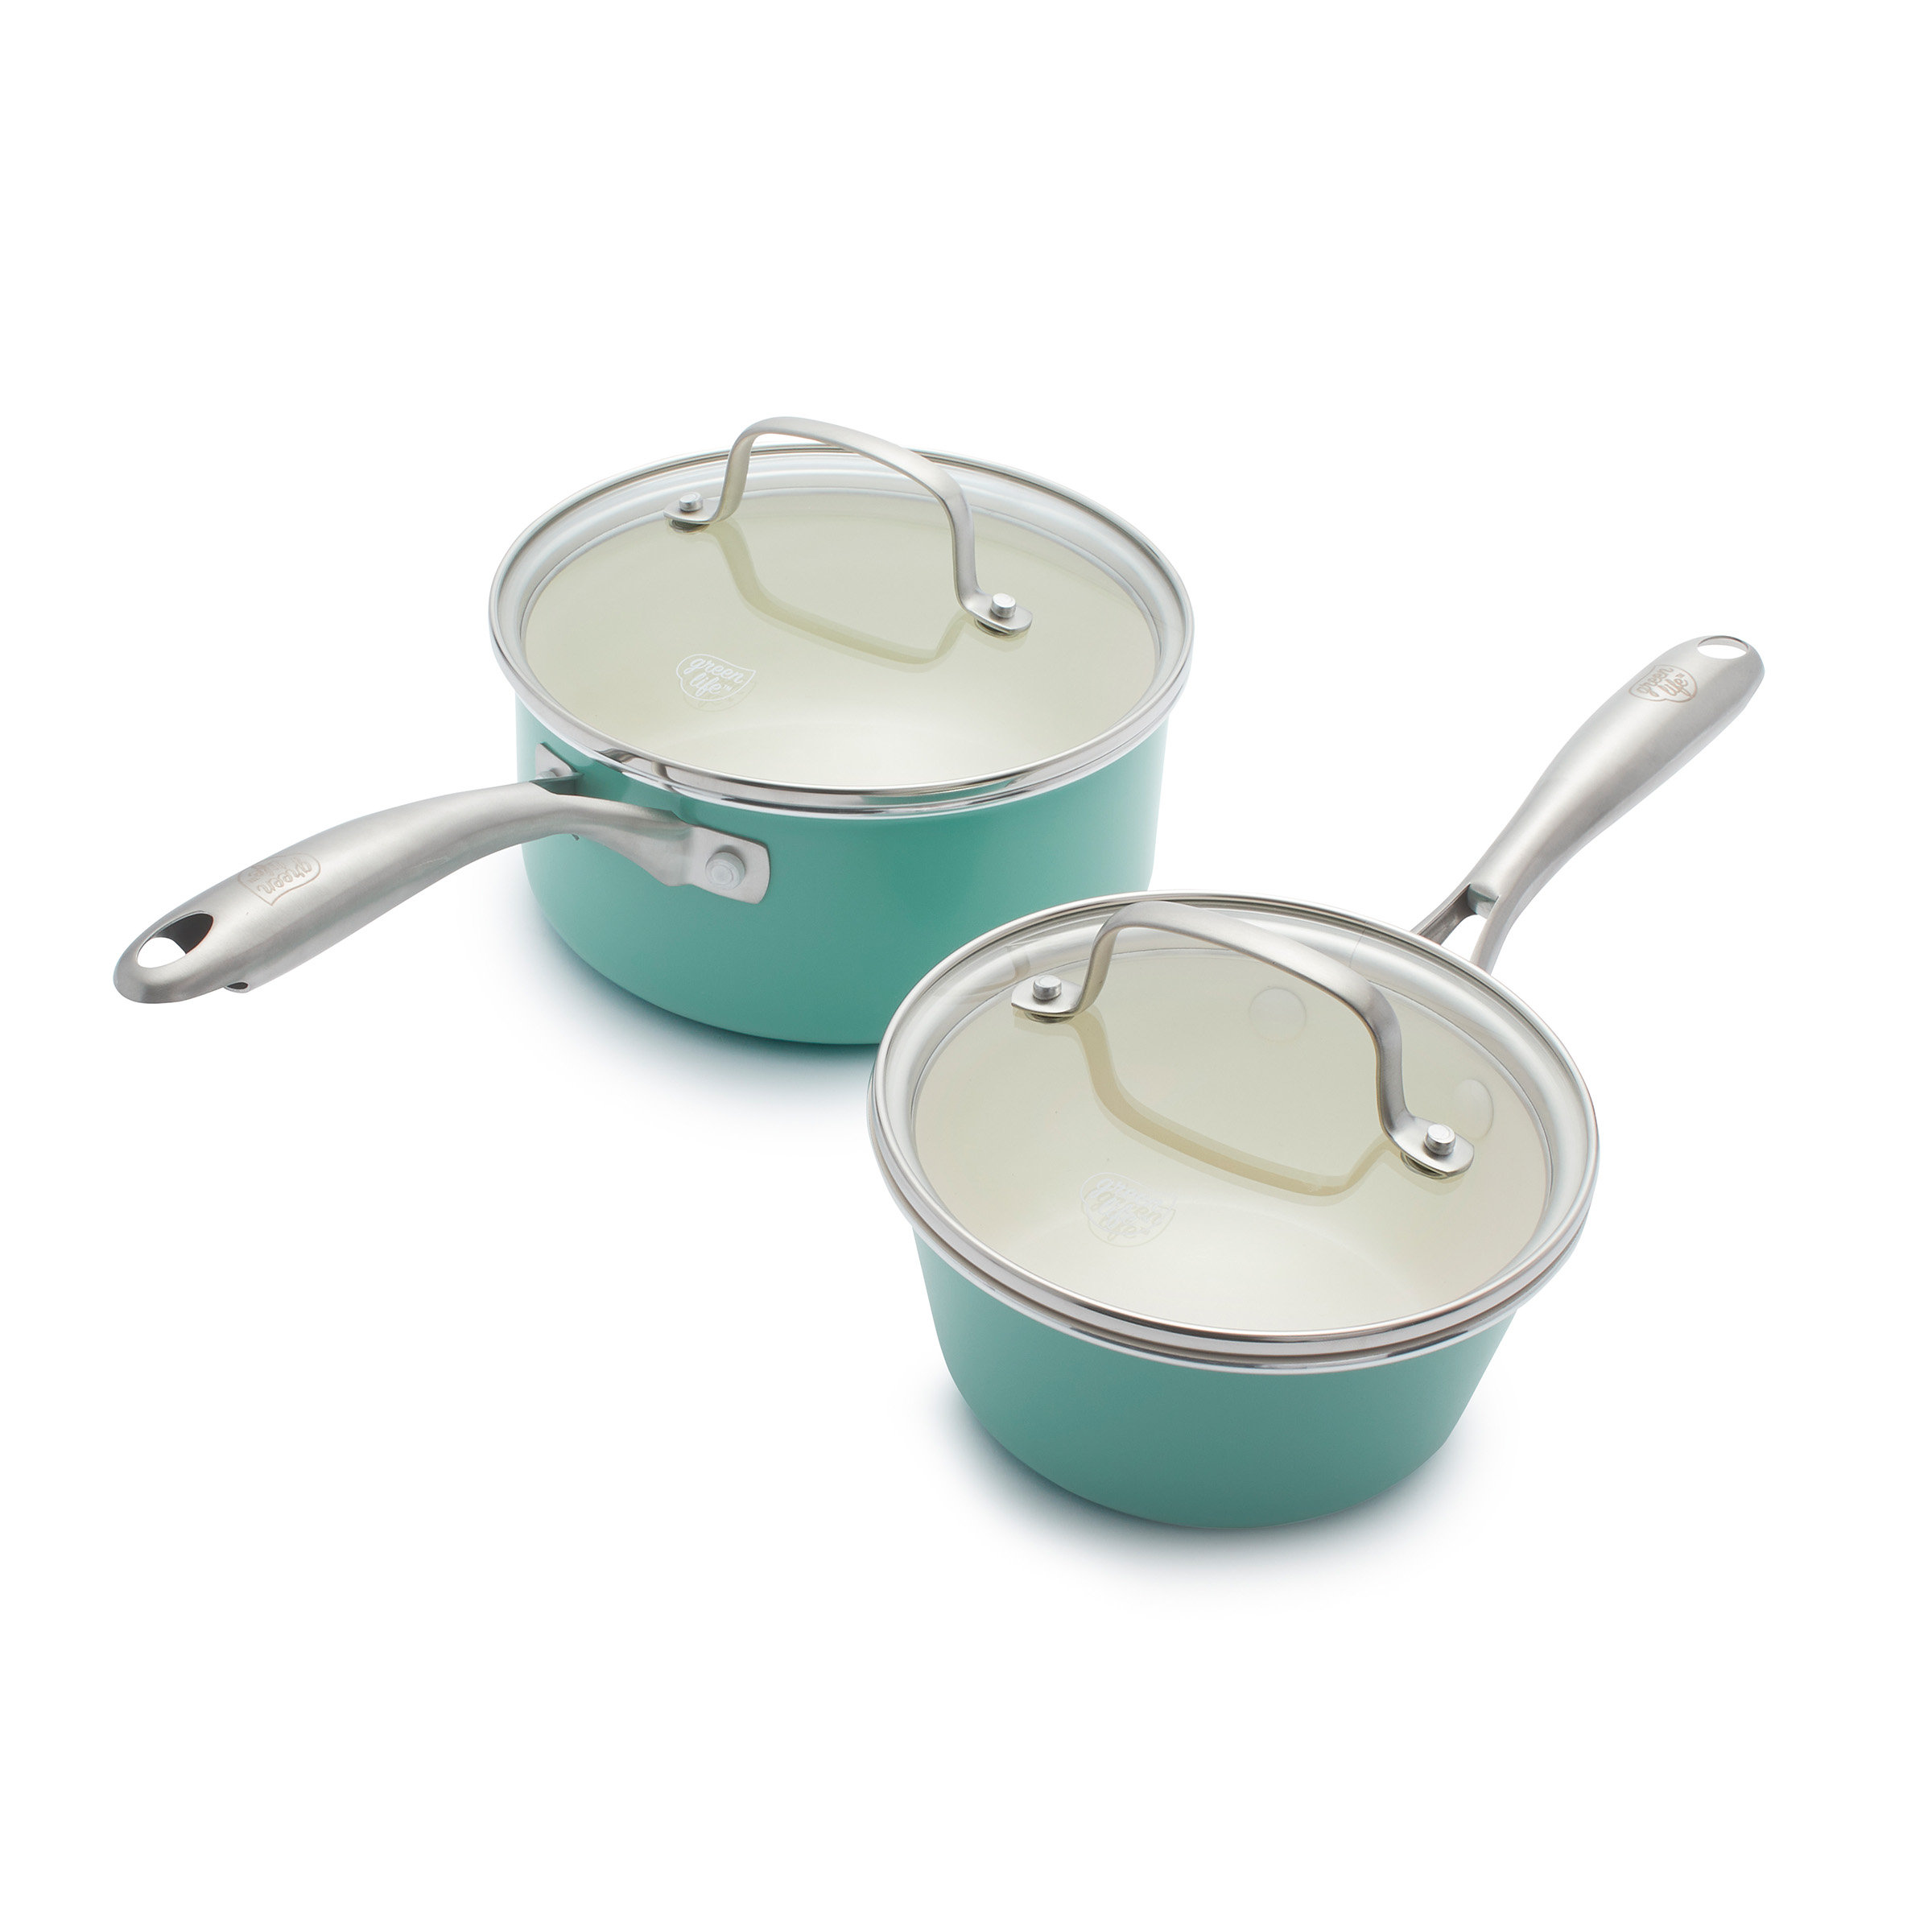 GreenLife  Stainless Pro 8 and 11-Inch Frypan Set